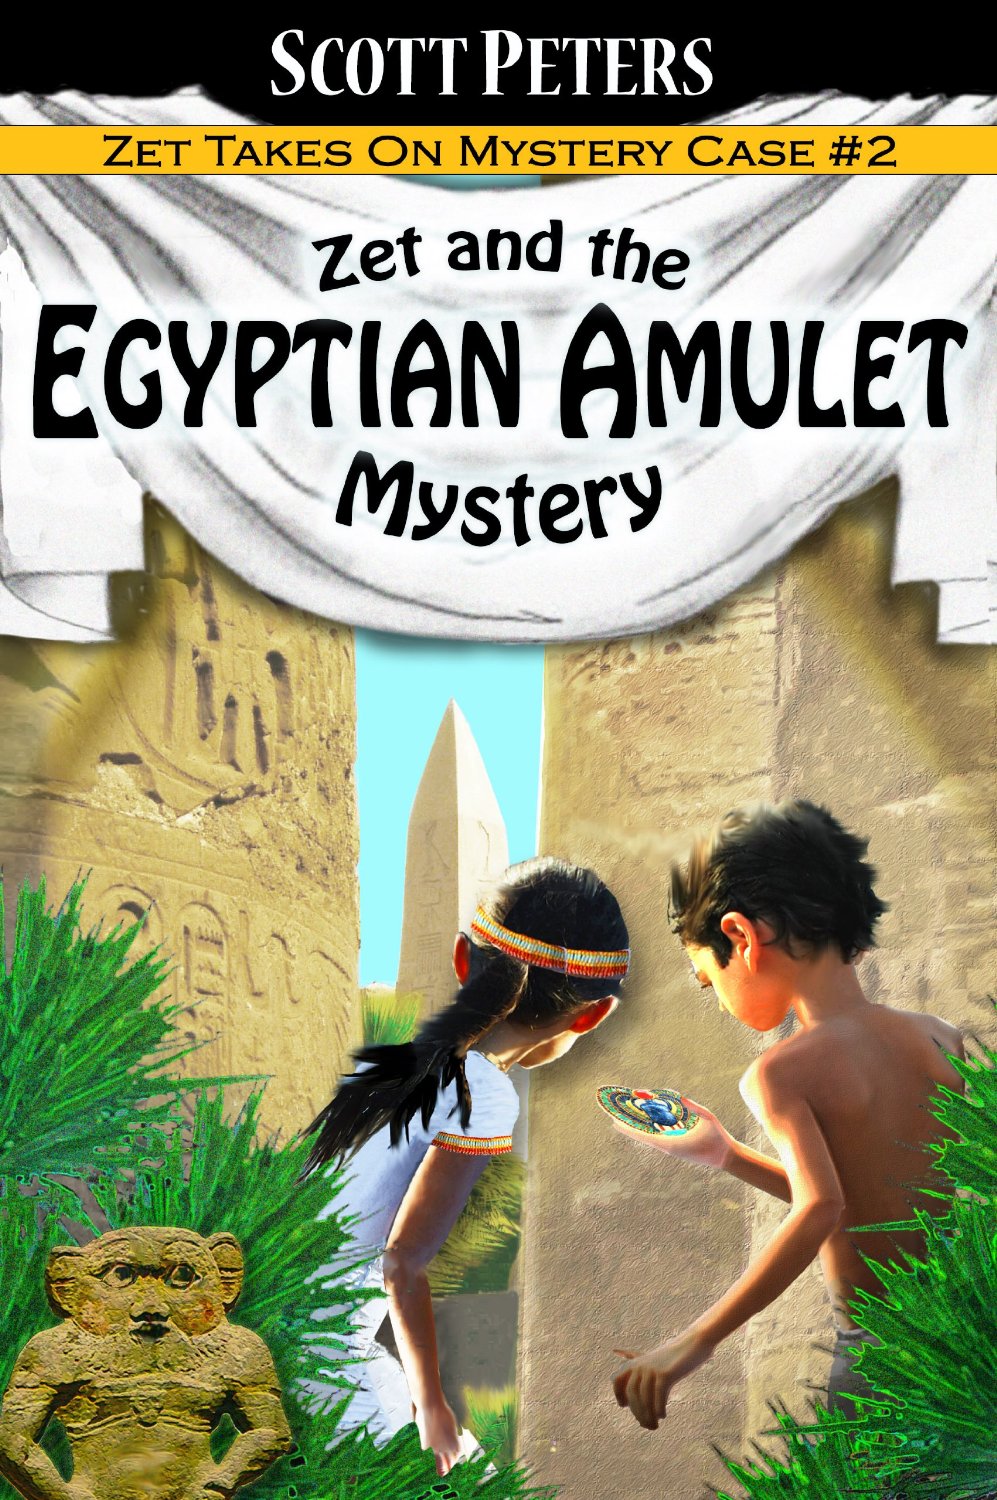 Zet and the Egyptian Amulet Mystery (Zet Mystery Case Book 2) by Scott Peters